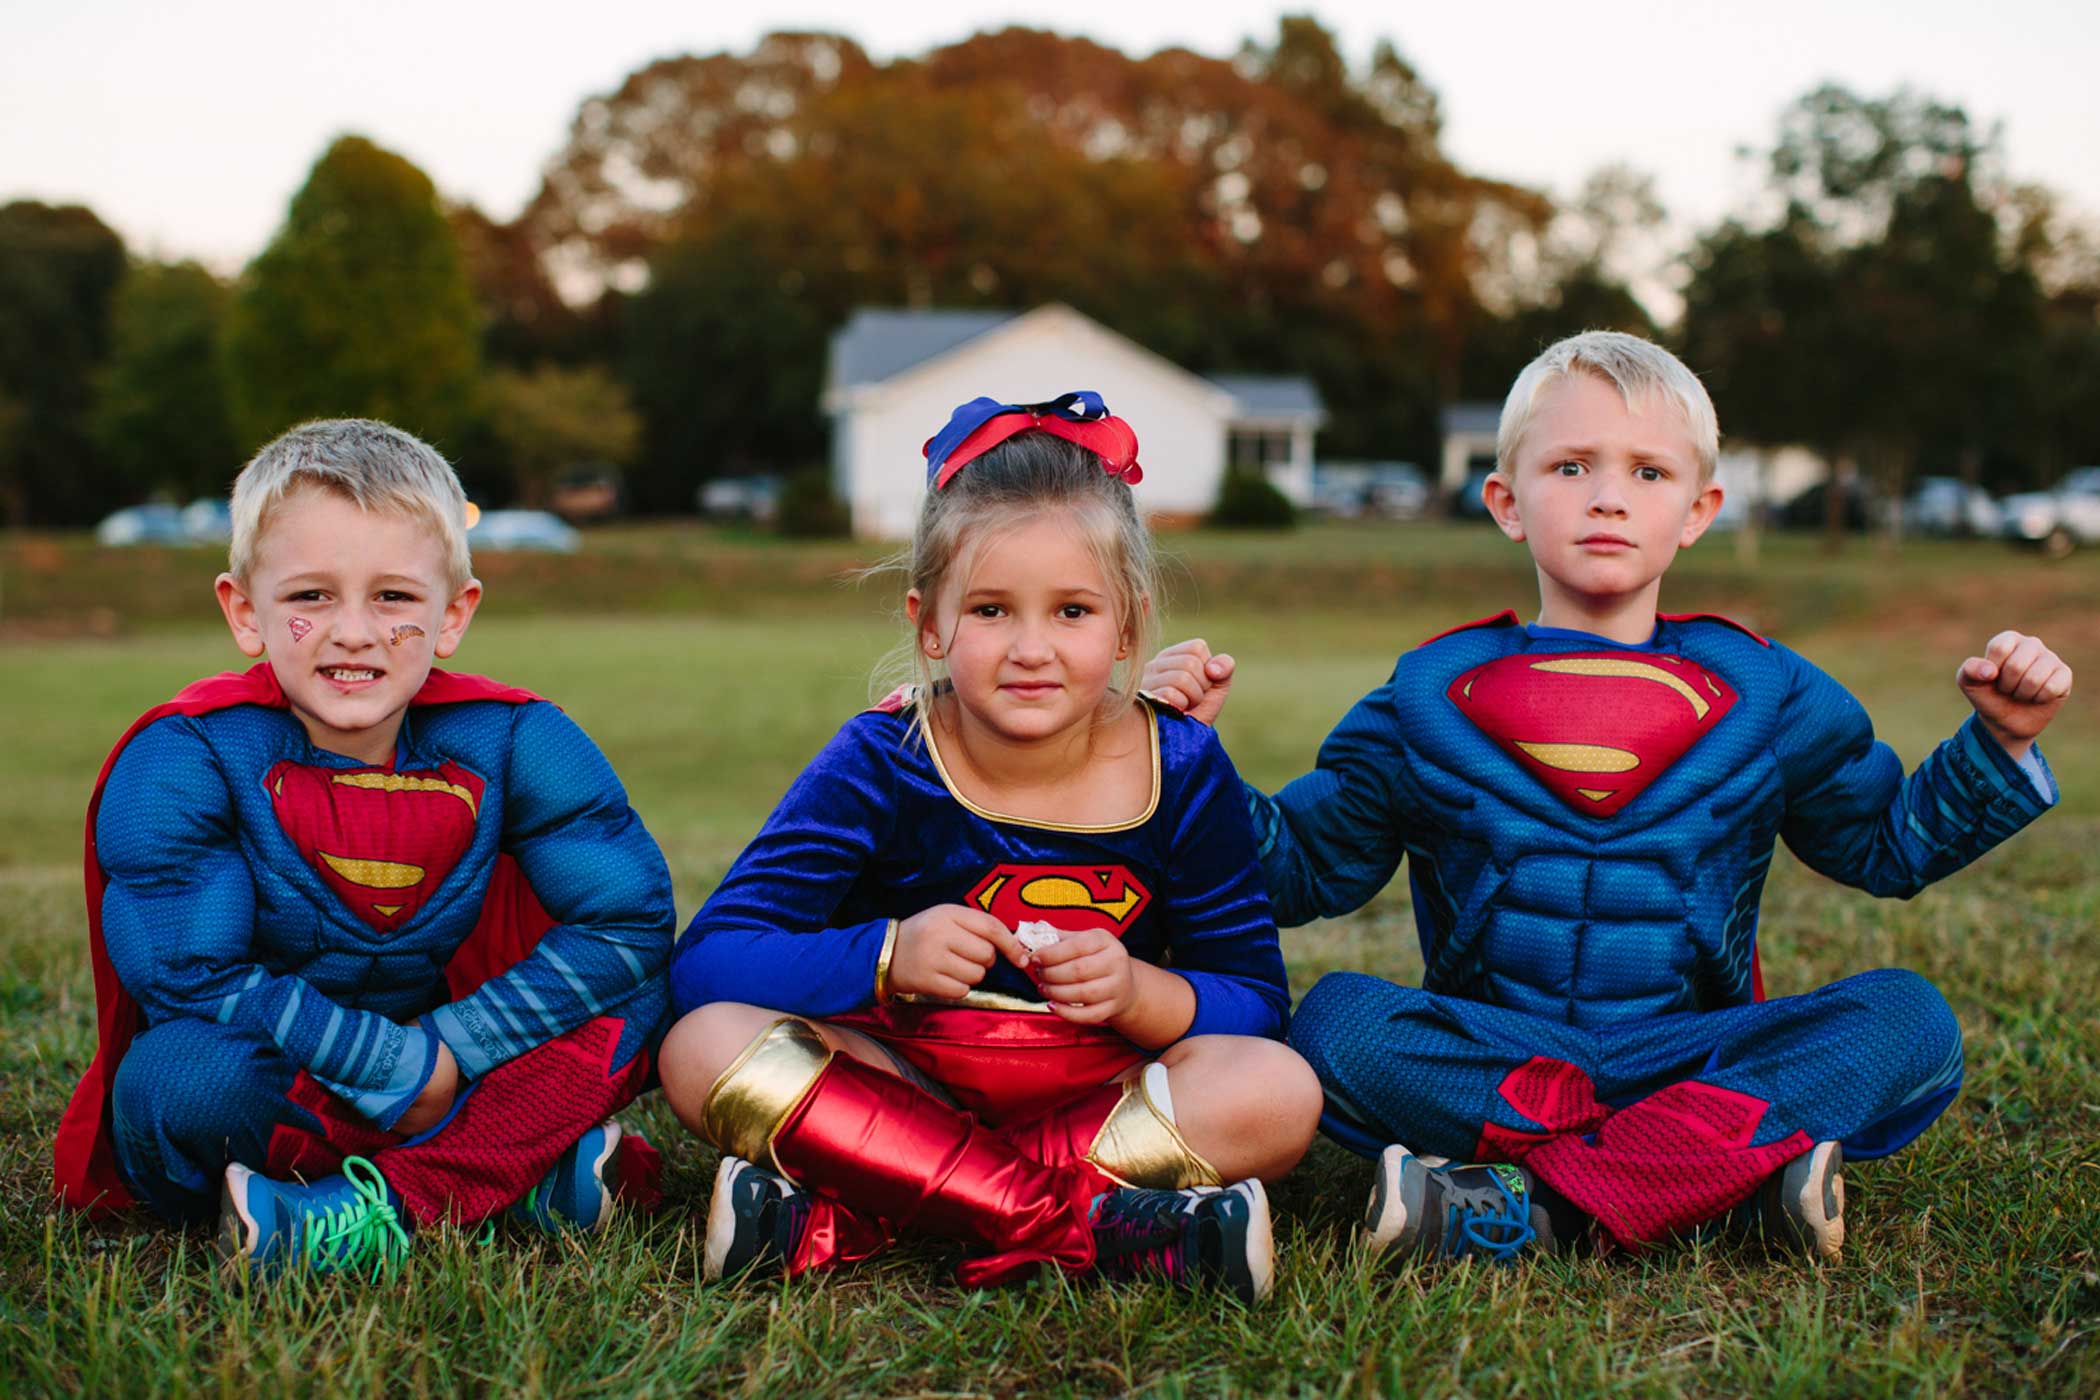 Matthew, Allie, and Carter Bradley are in kindergarten, first grade, and second grade at a school in nearby Anderson, South Carolina. Their mother, Melanie, says the kids asked to attend the visitation, and offered to donate blood. (Dustin Chambers for The Trace)